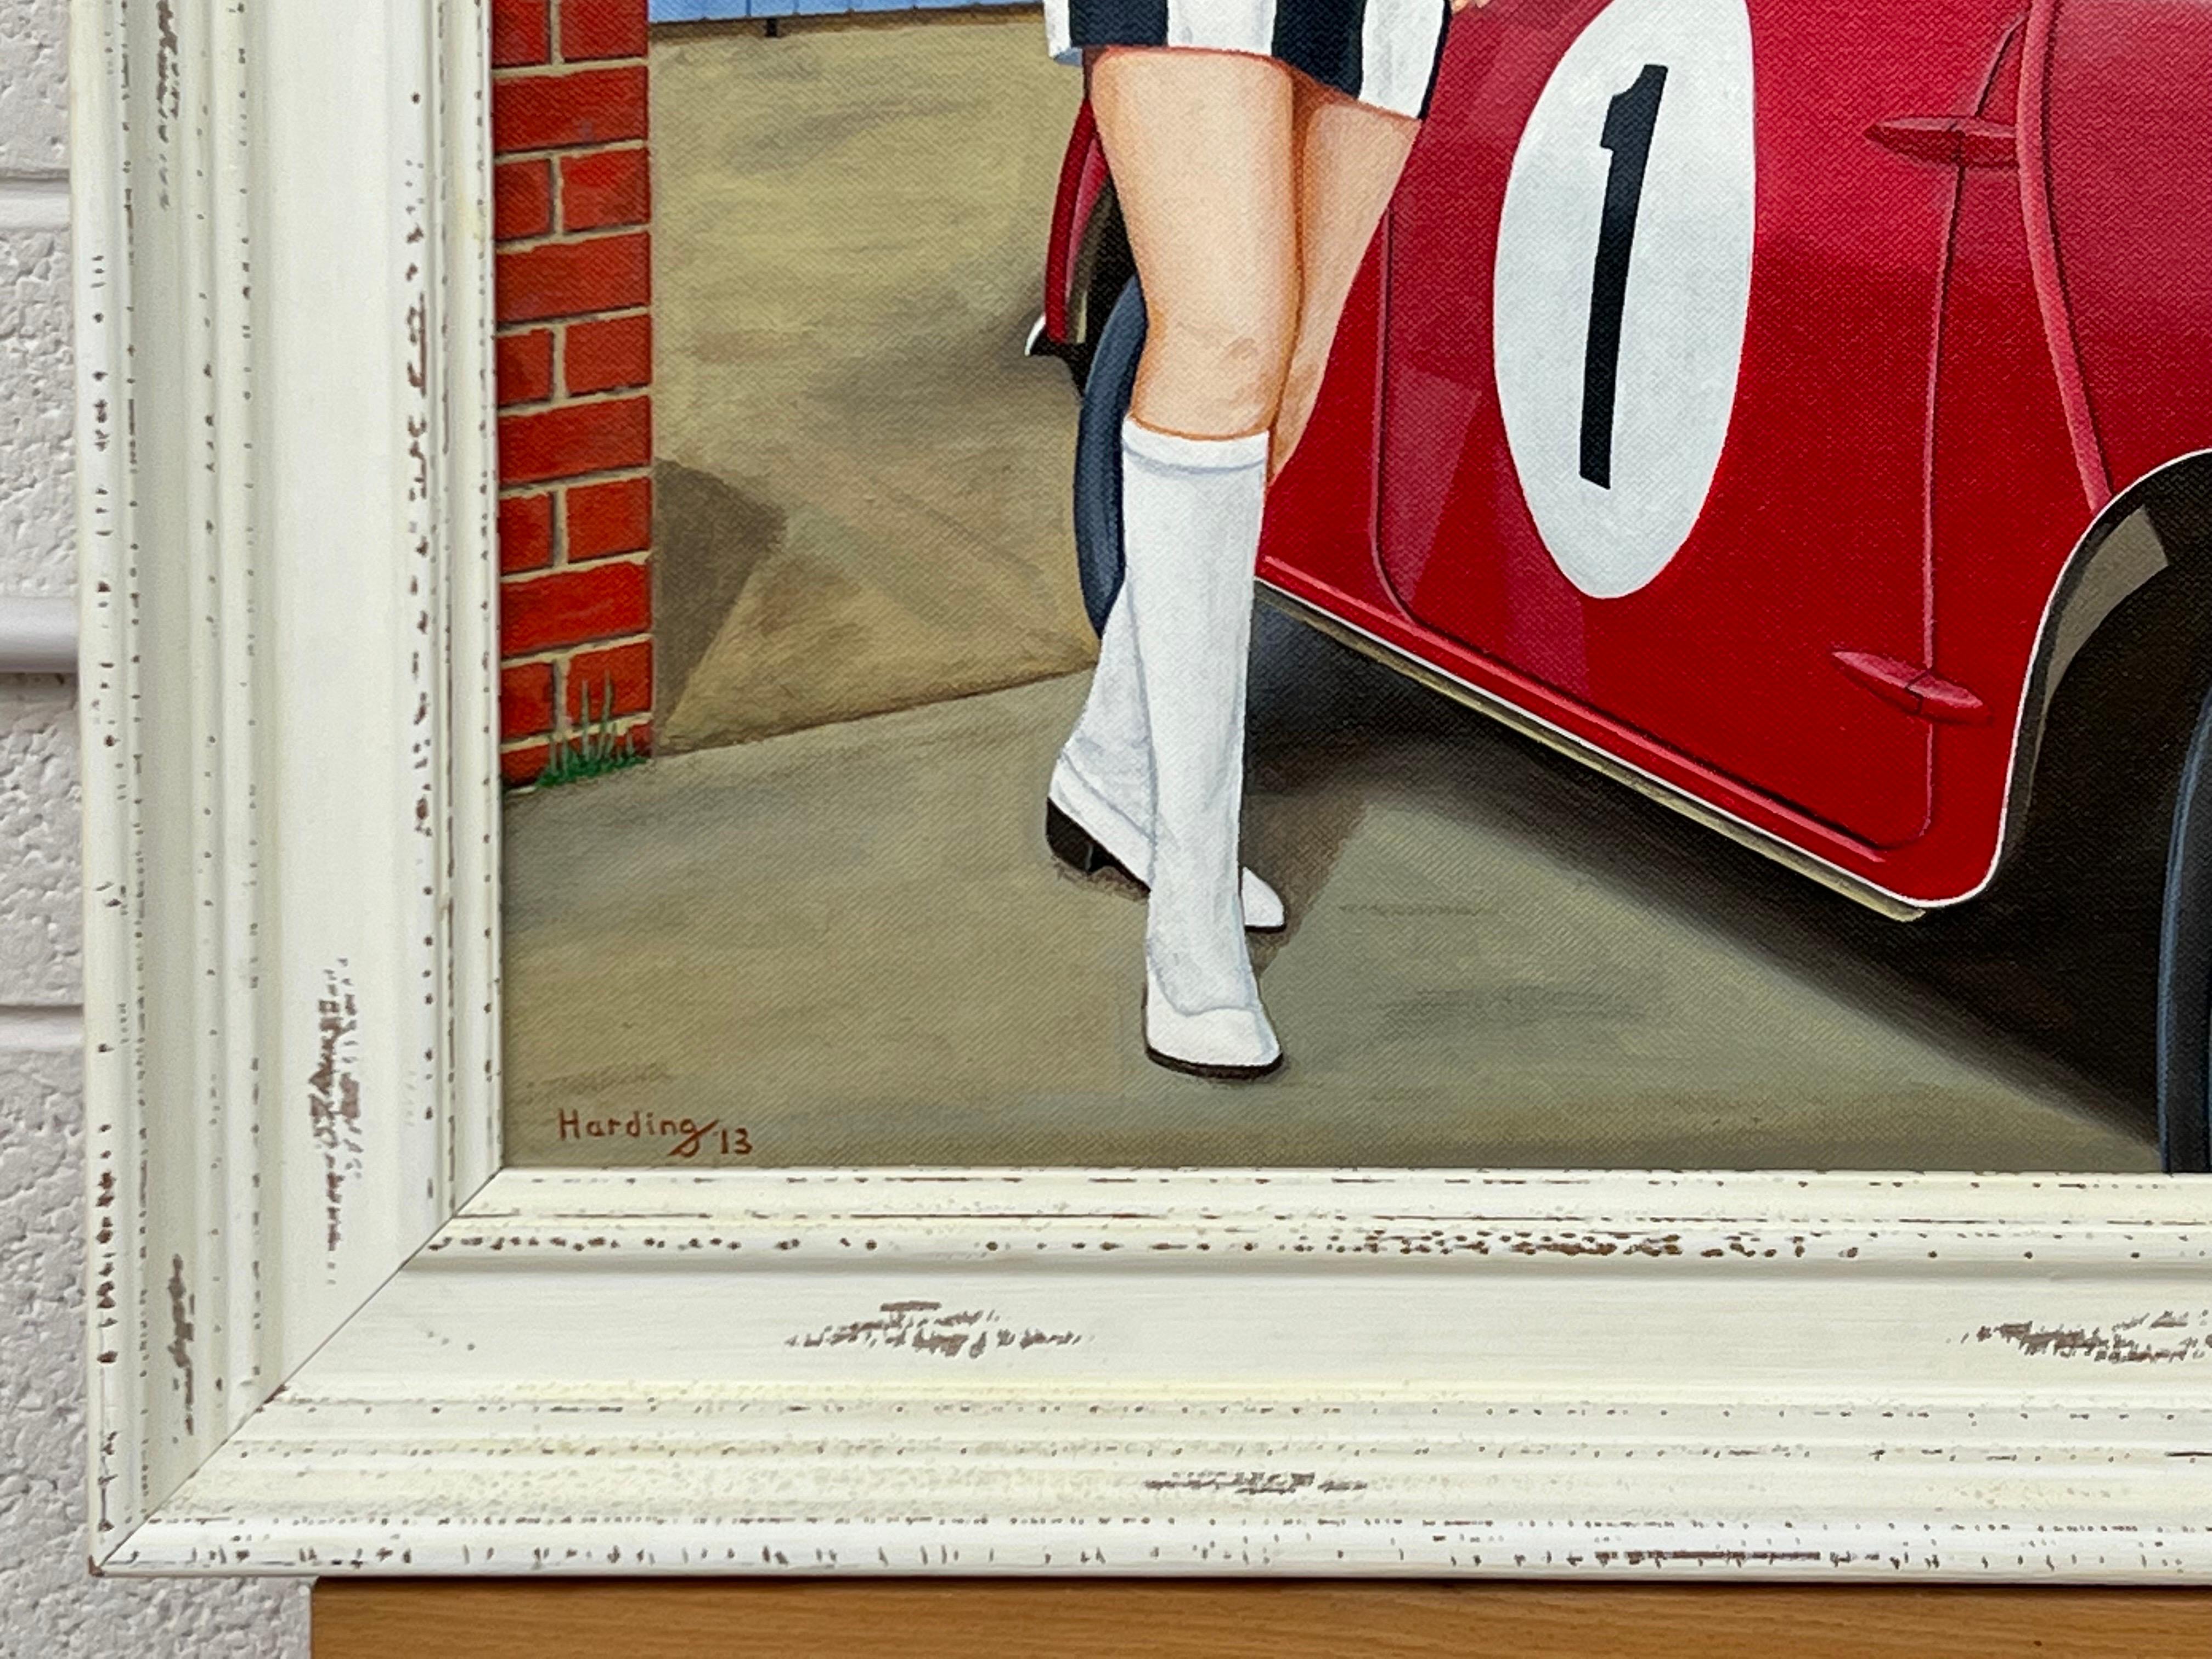 'A Racy Little Number’ a Woman with a Red Austin Mini Car in 1970's England - Painting by Paul F Harding